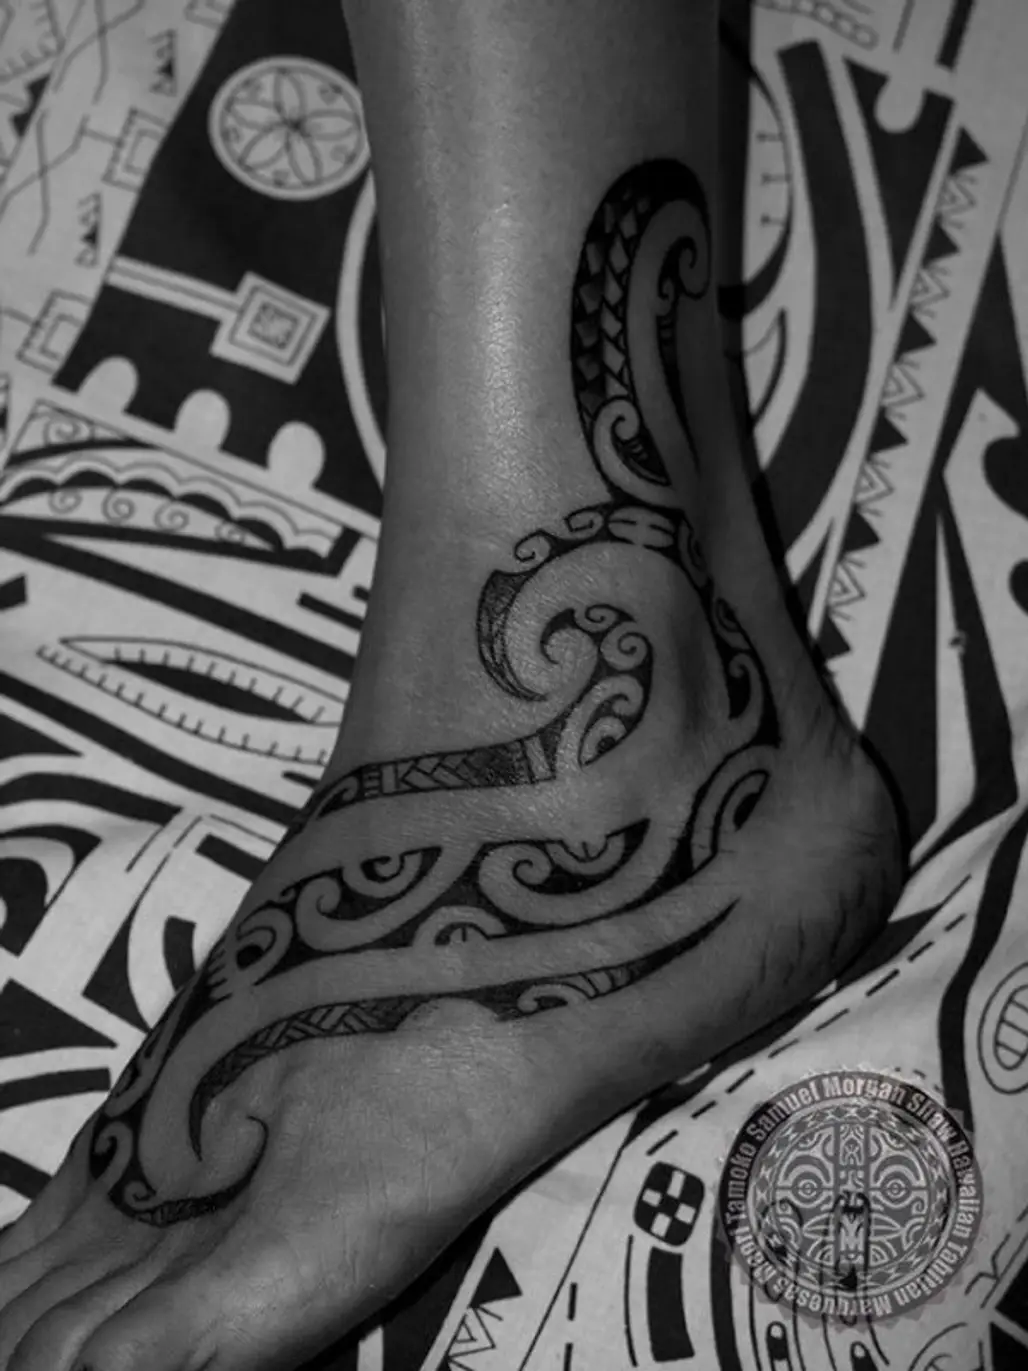 Maori tribal style tattoo pattern fit for a leg. With example on